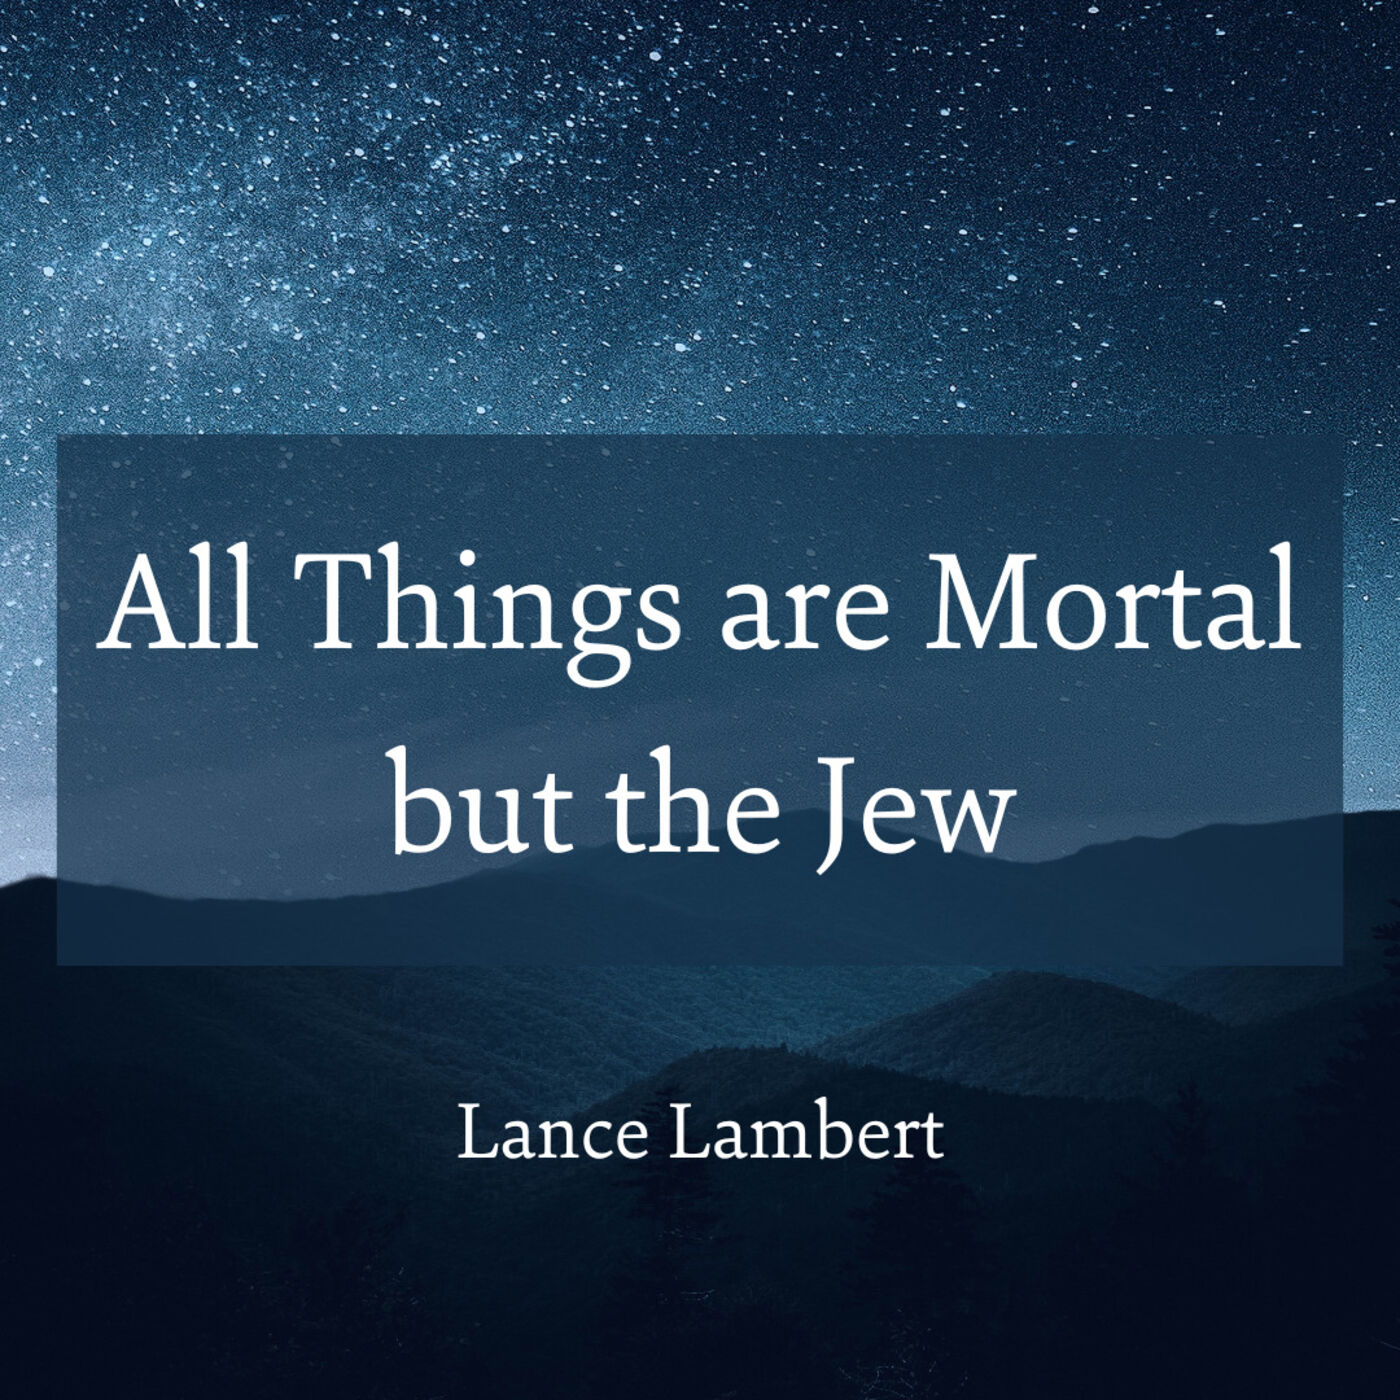 All Things are Mortal but the Jew